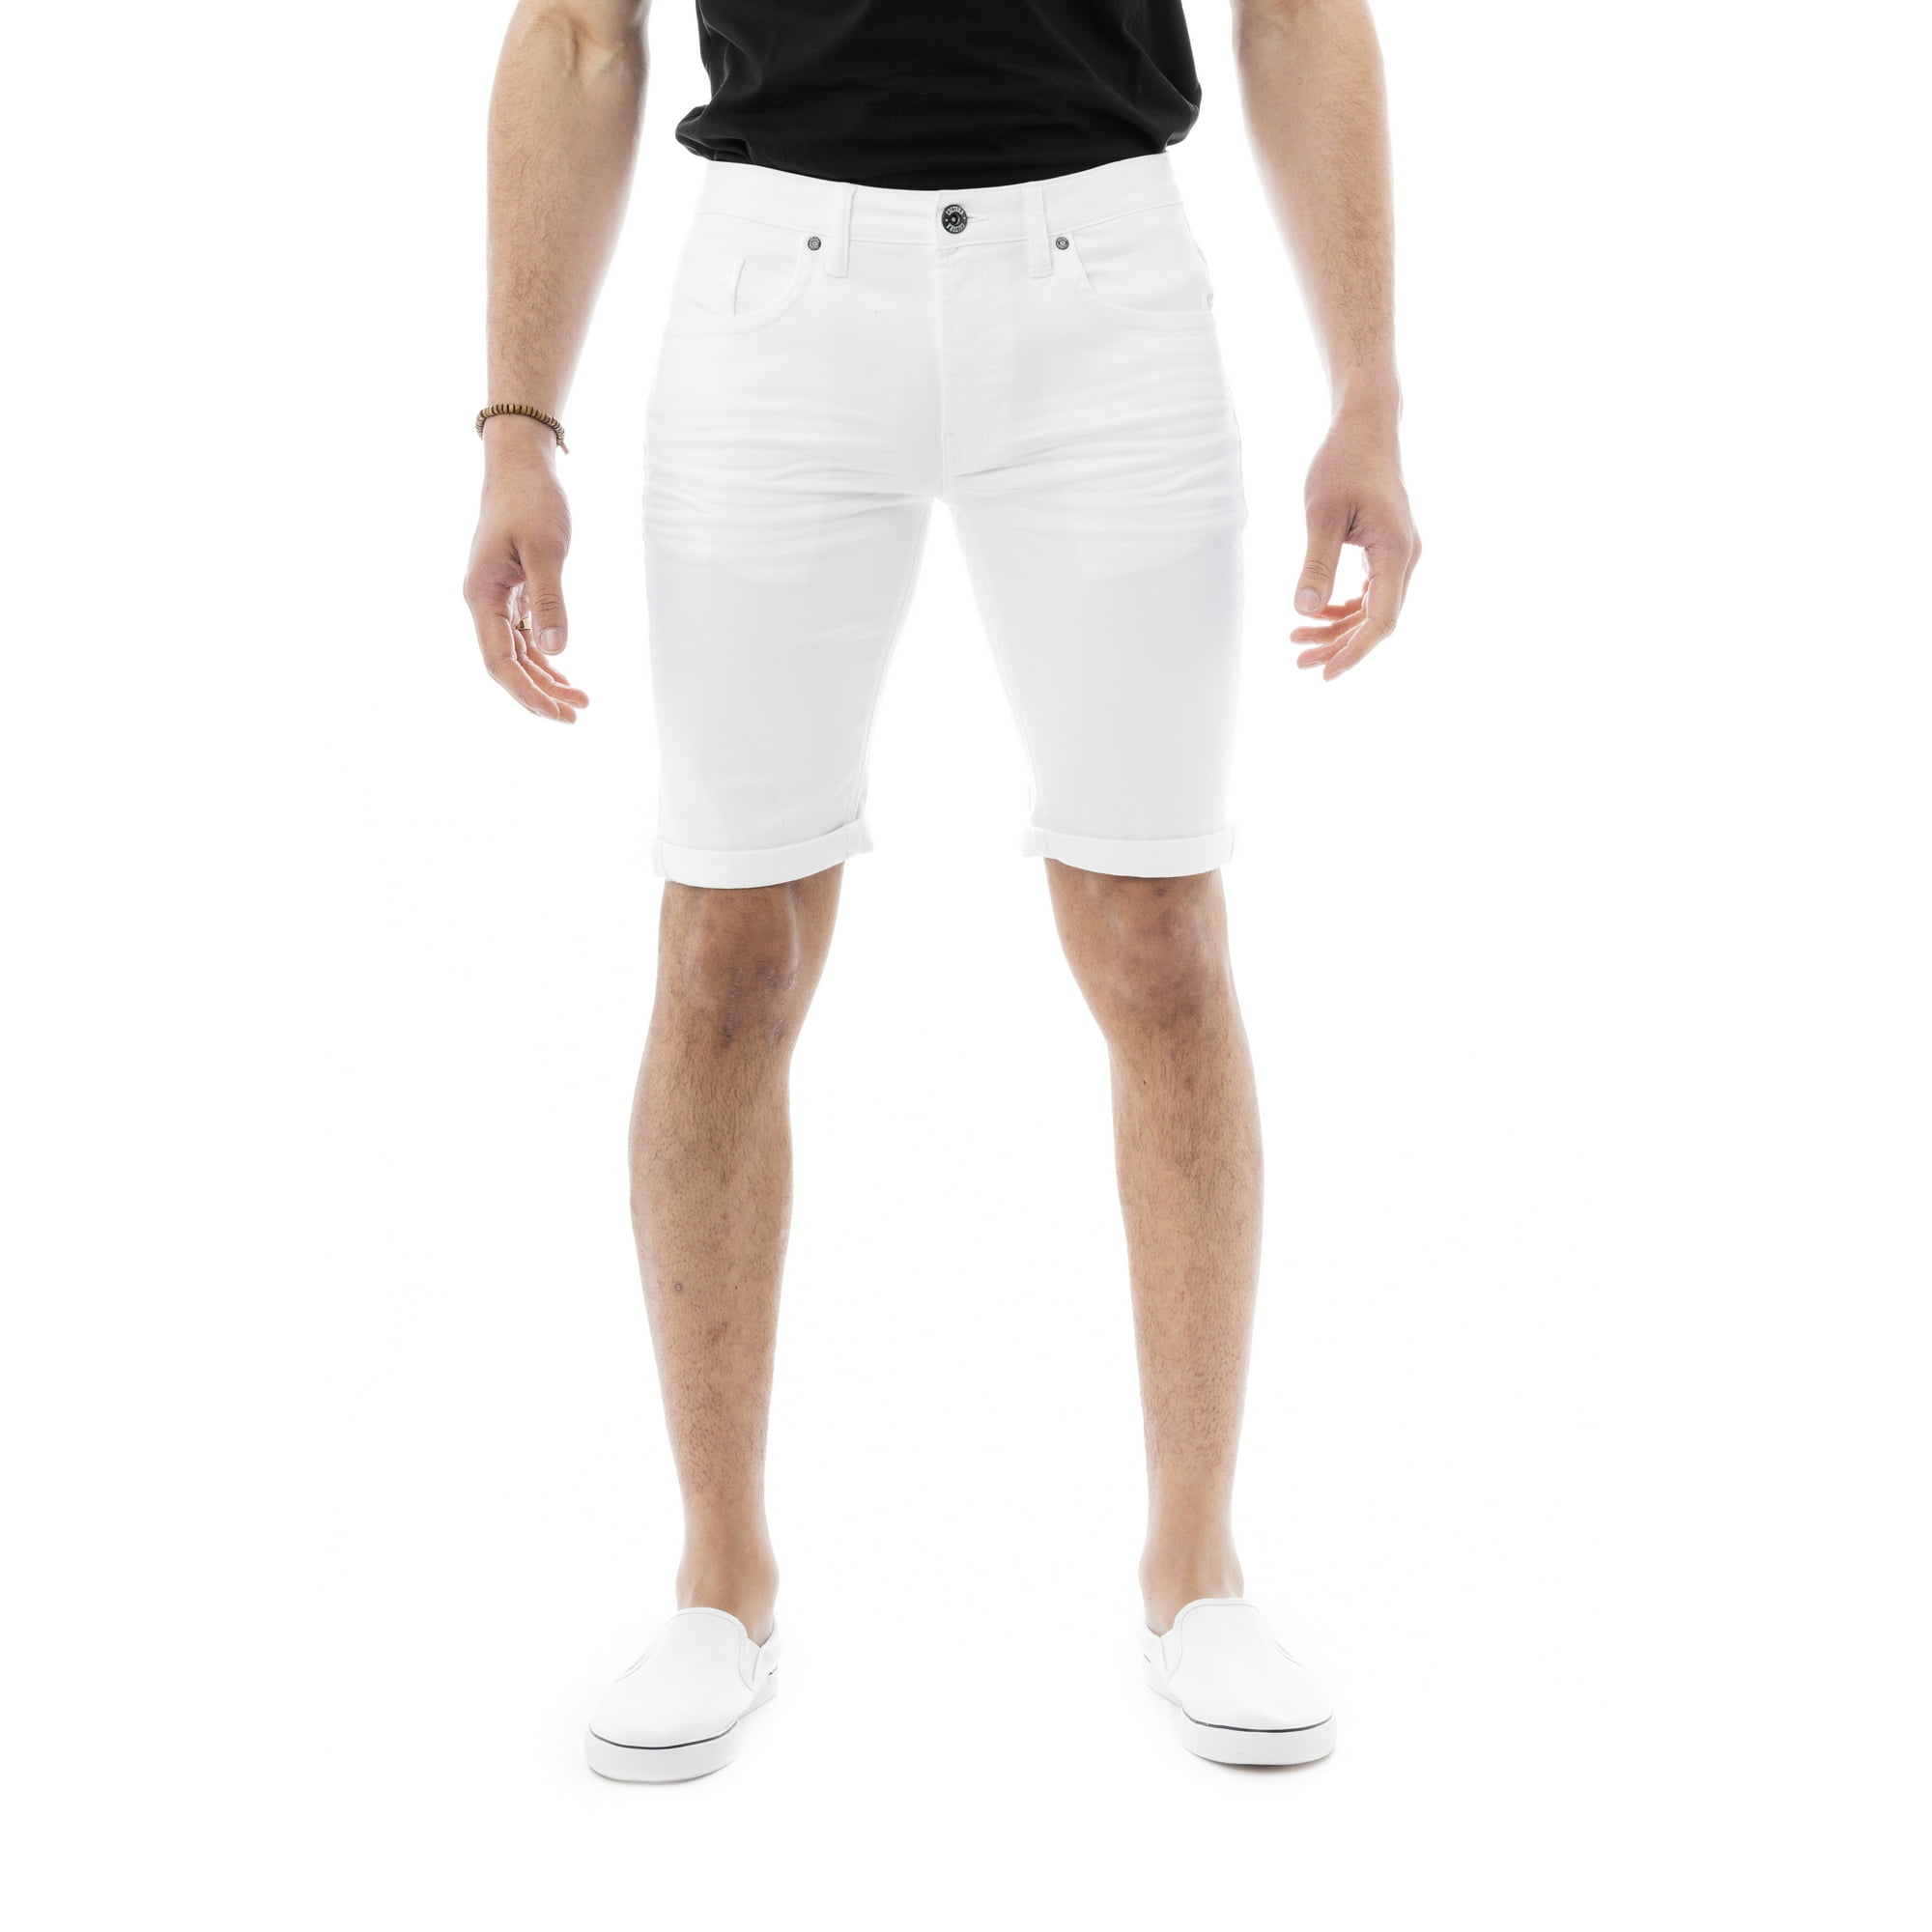 Men's Shorts Outfits: The Best in Modern Style